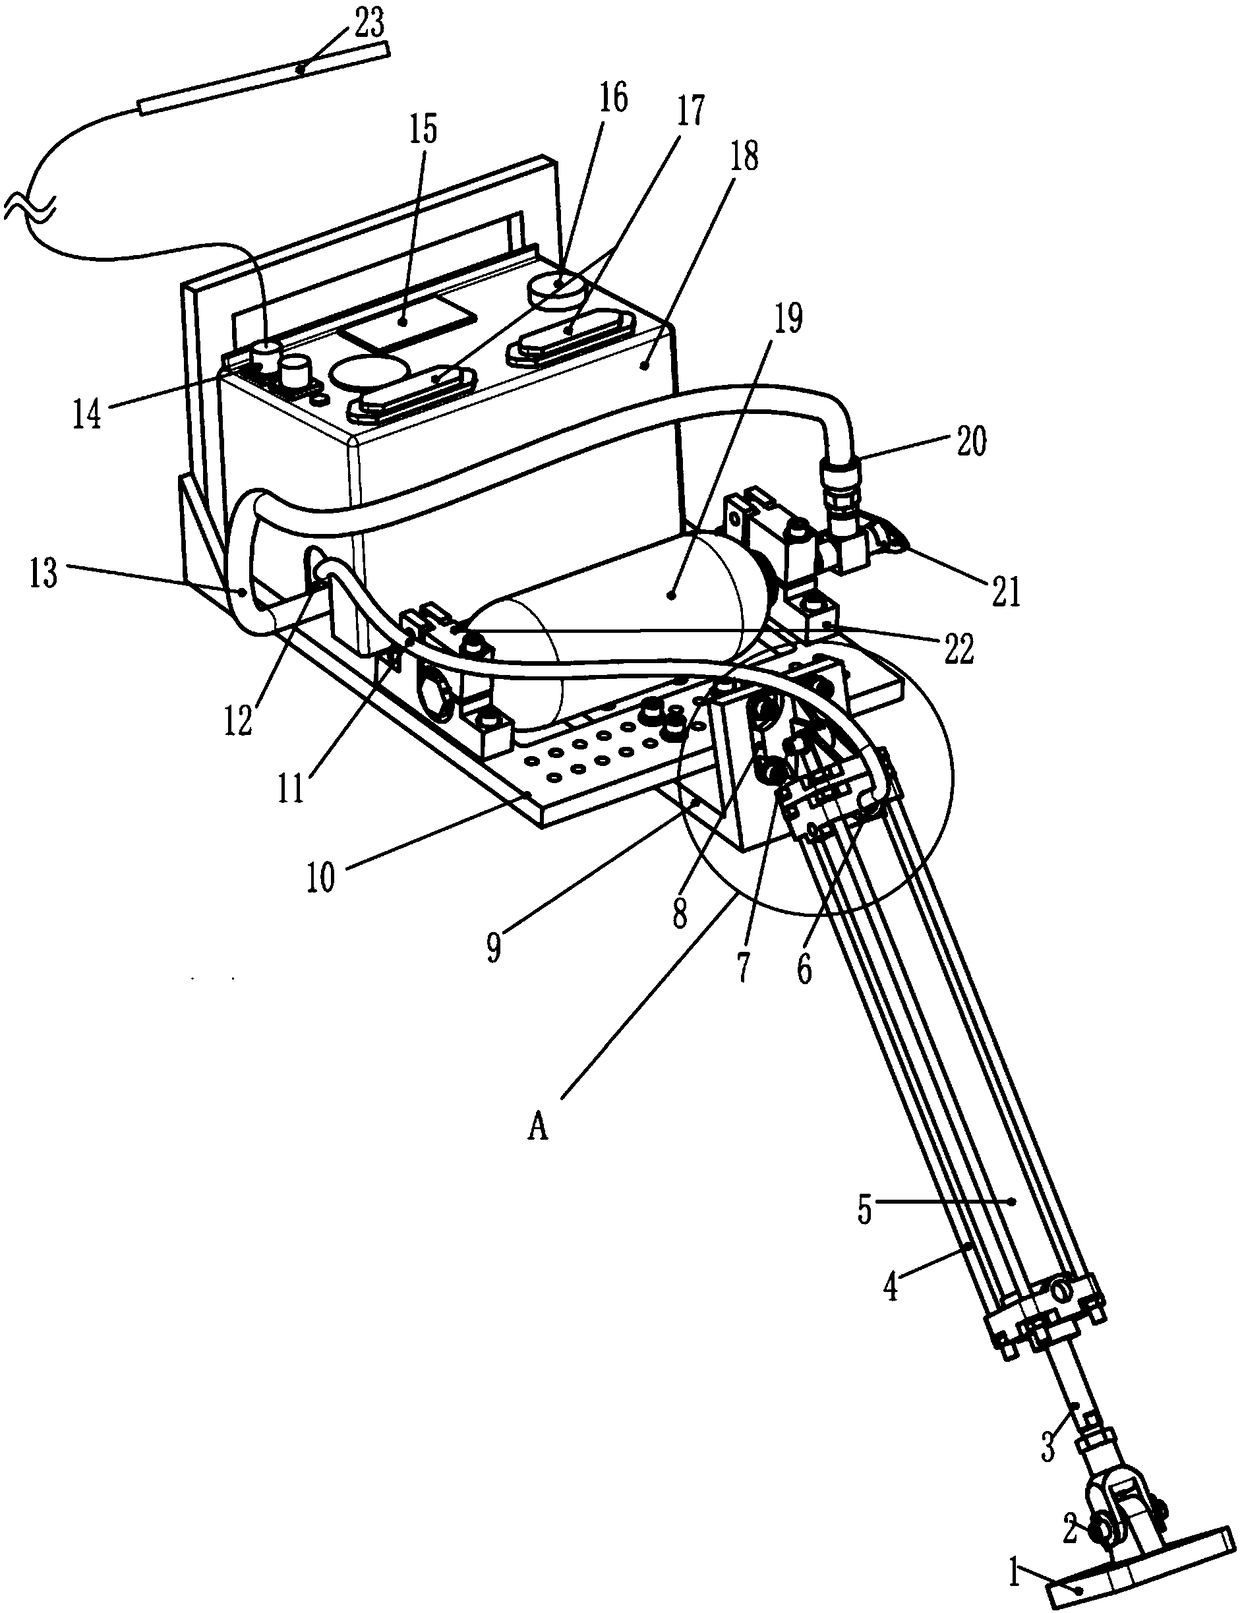 Vehicle-mounted brake device for automobile rear impact test